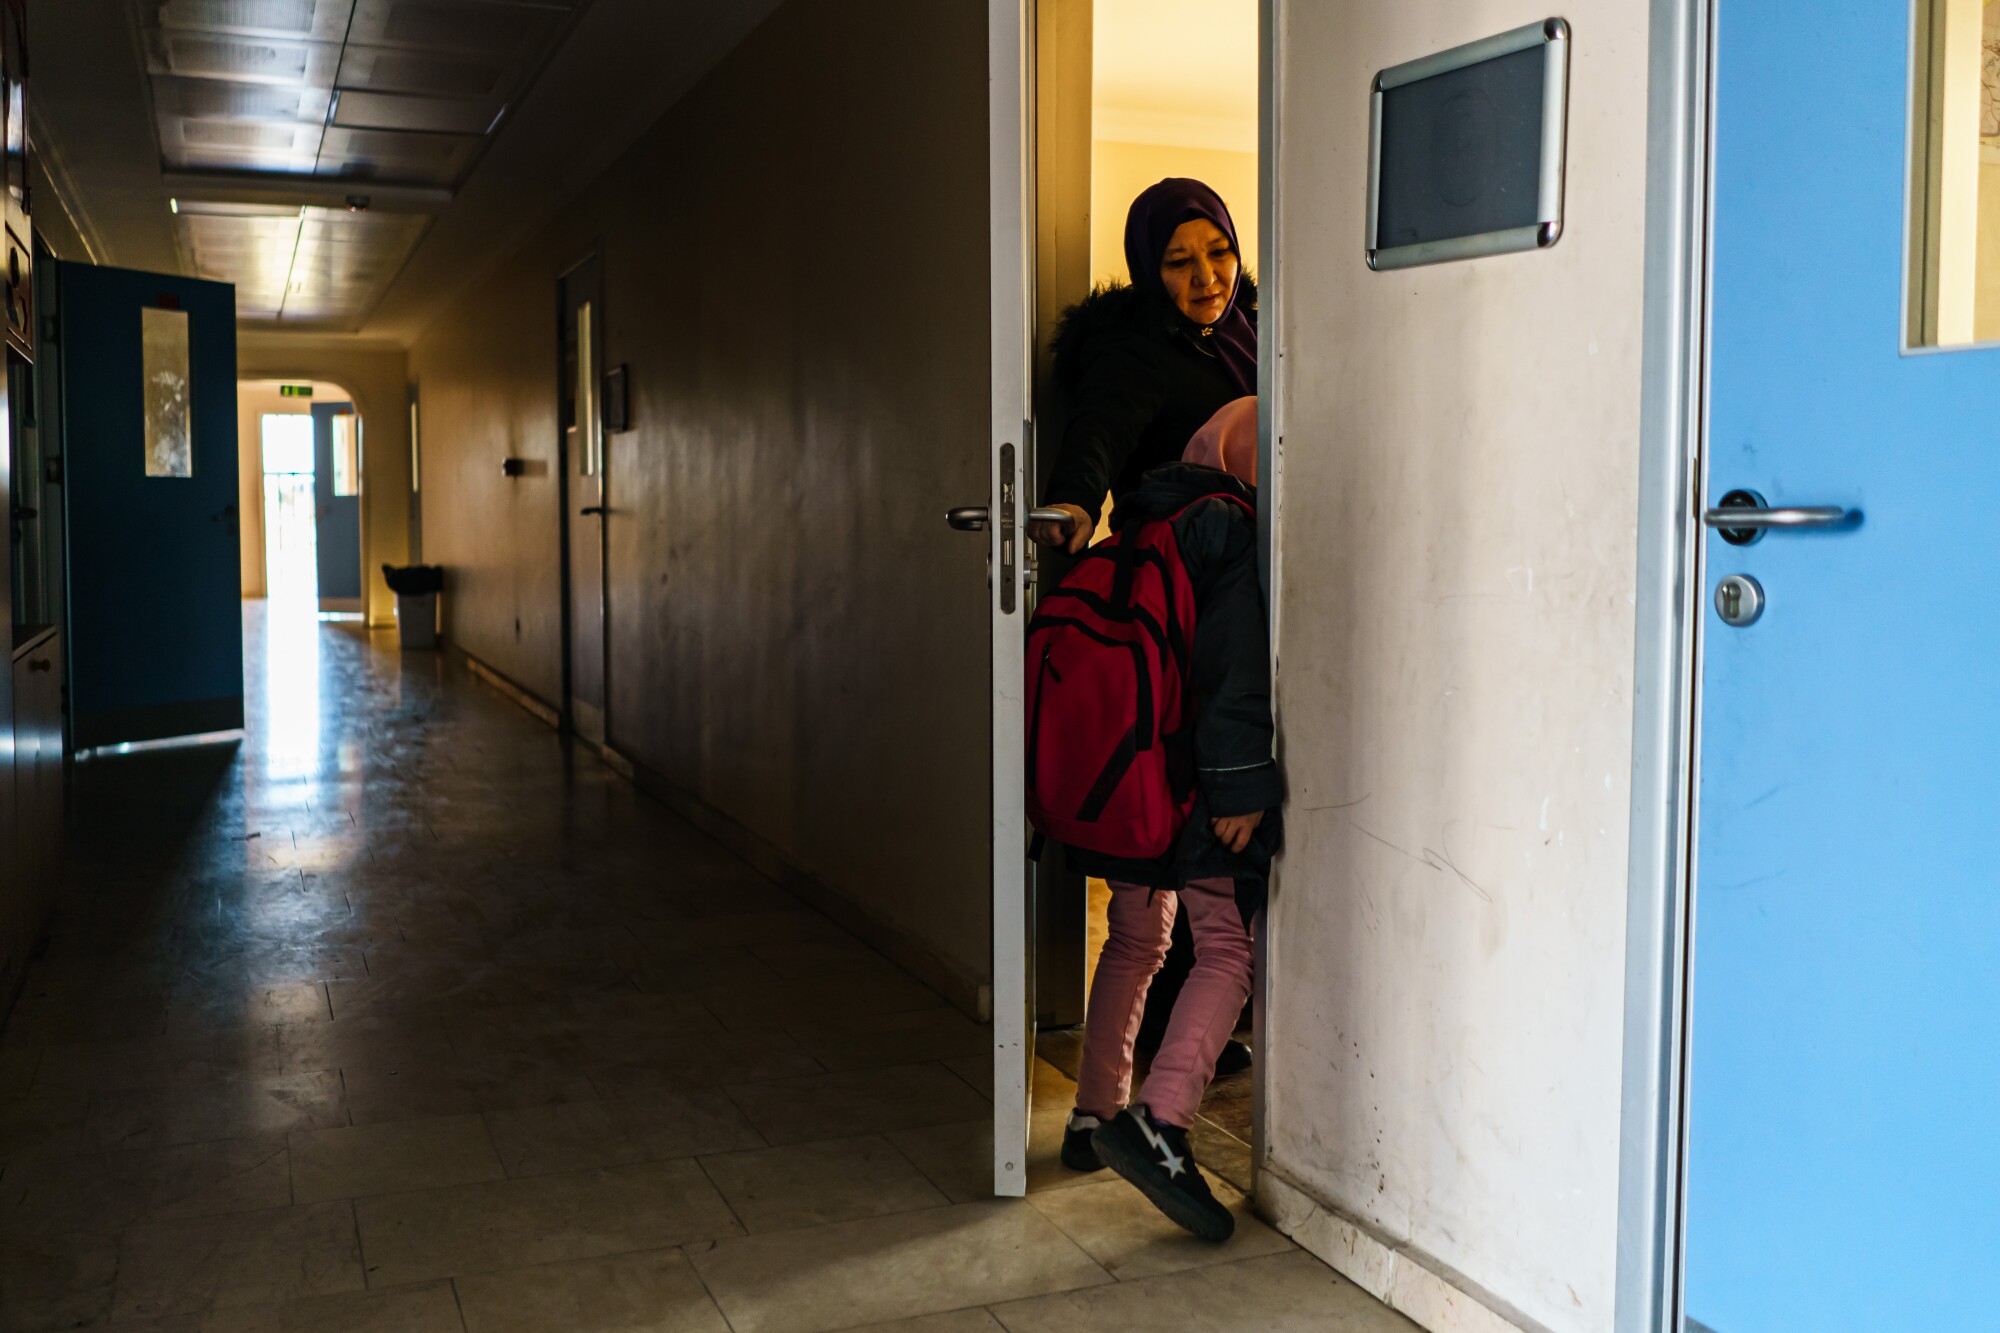 A child in a backpack slips through a school door.